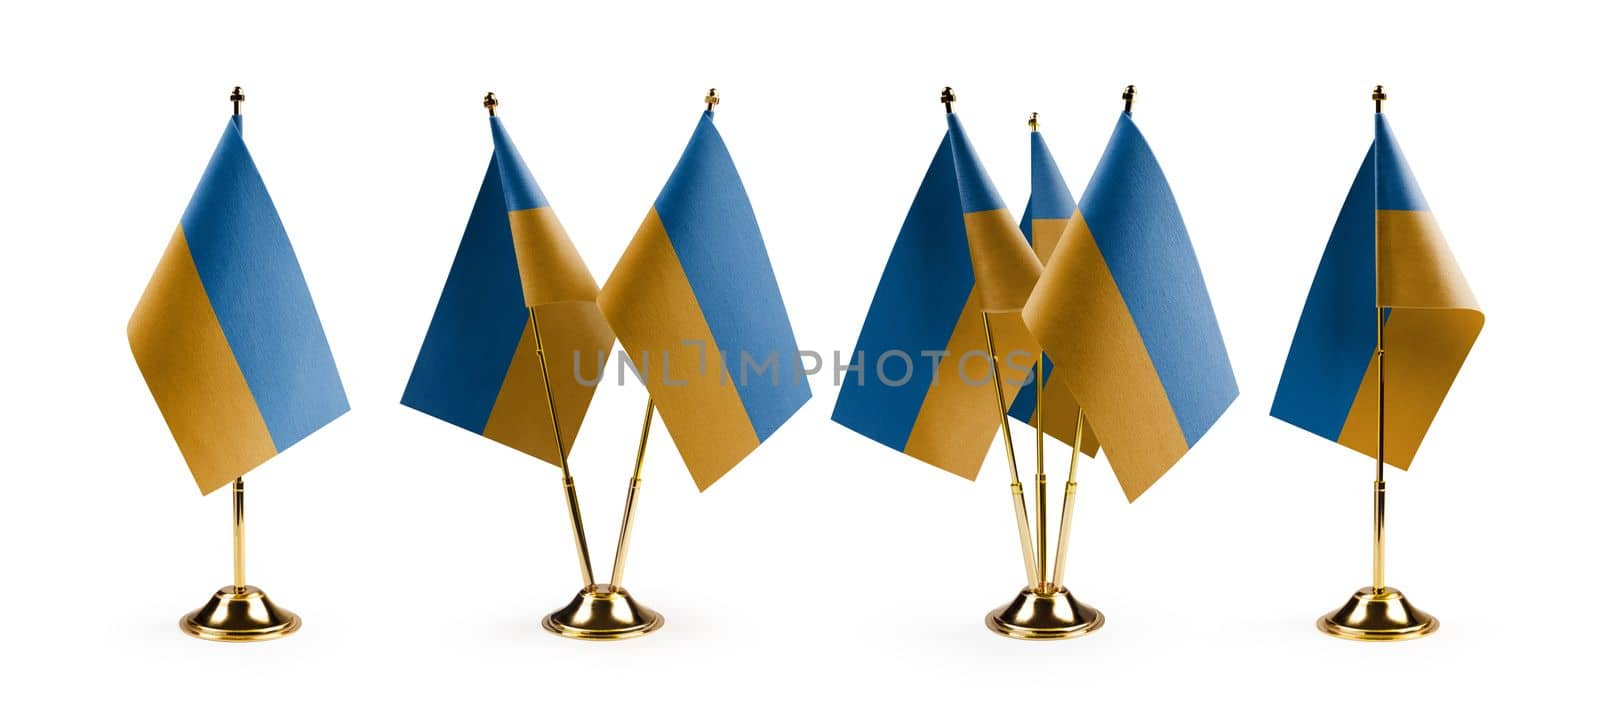 Small national flags of the Ukraine on a white background by butenkow